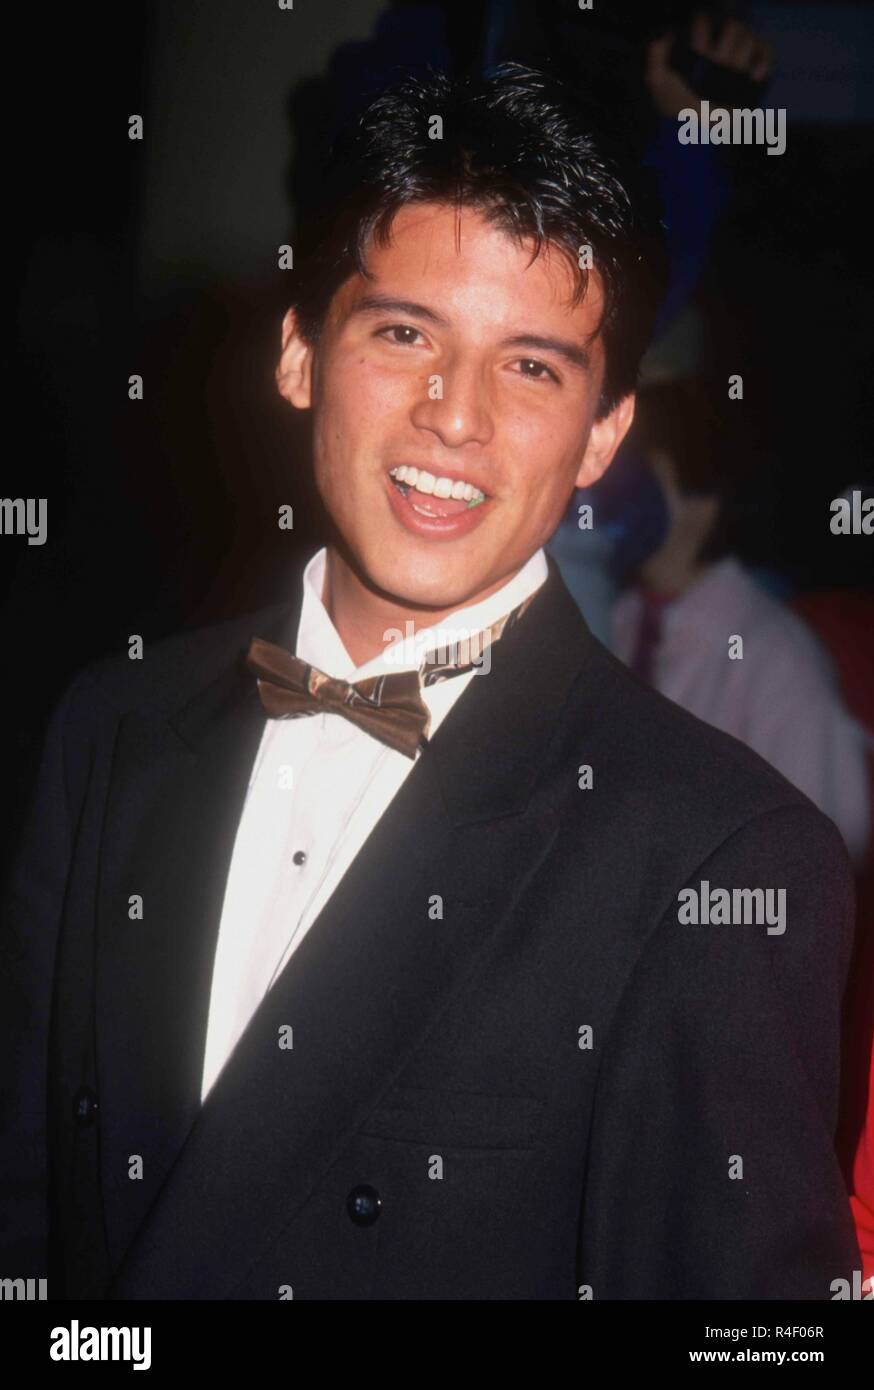 BEVERLY HILLS, CA - FEBRUARY 26: An actor attends the Ninth Annual Soap Opera Digest Awards on February 26, 1993 at the Beverly Hilton Hotel in Beverly Hills, California. Photo by Barry King/Alamy Stock Photo Stock Photo